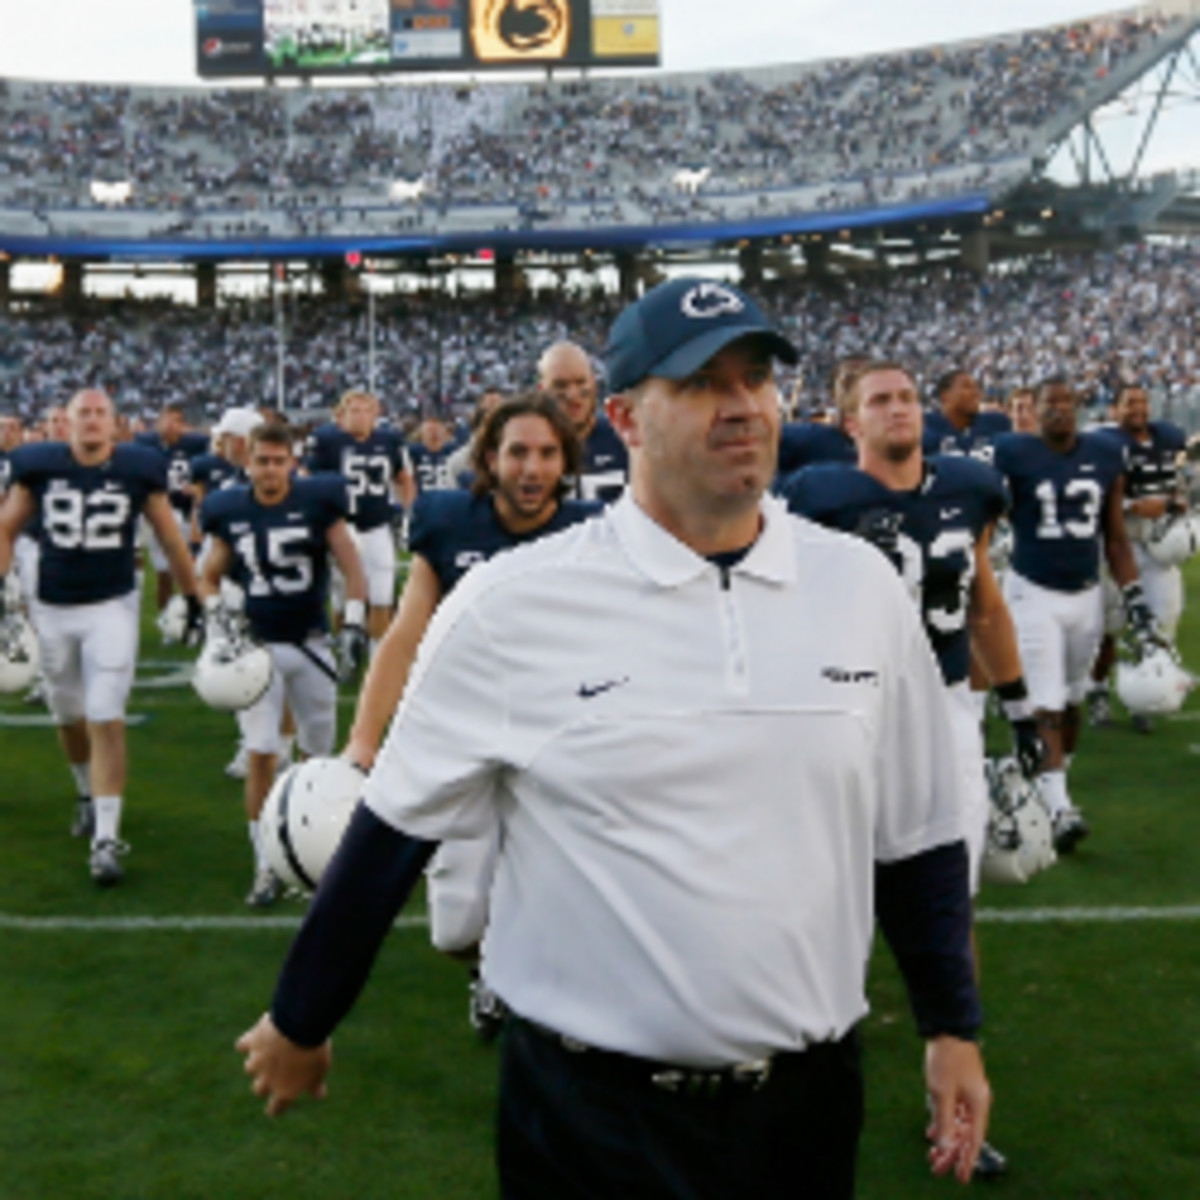 Penn State coach Bill O'Brien said the team could play a game in Ireland sometime in the near future. (Rob Carr/Getty Images)